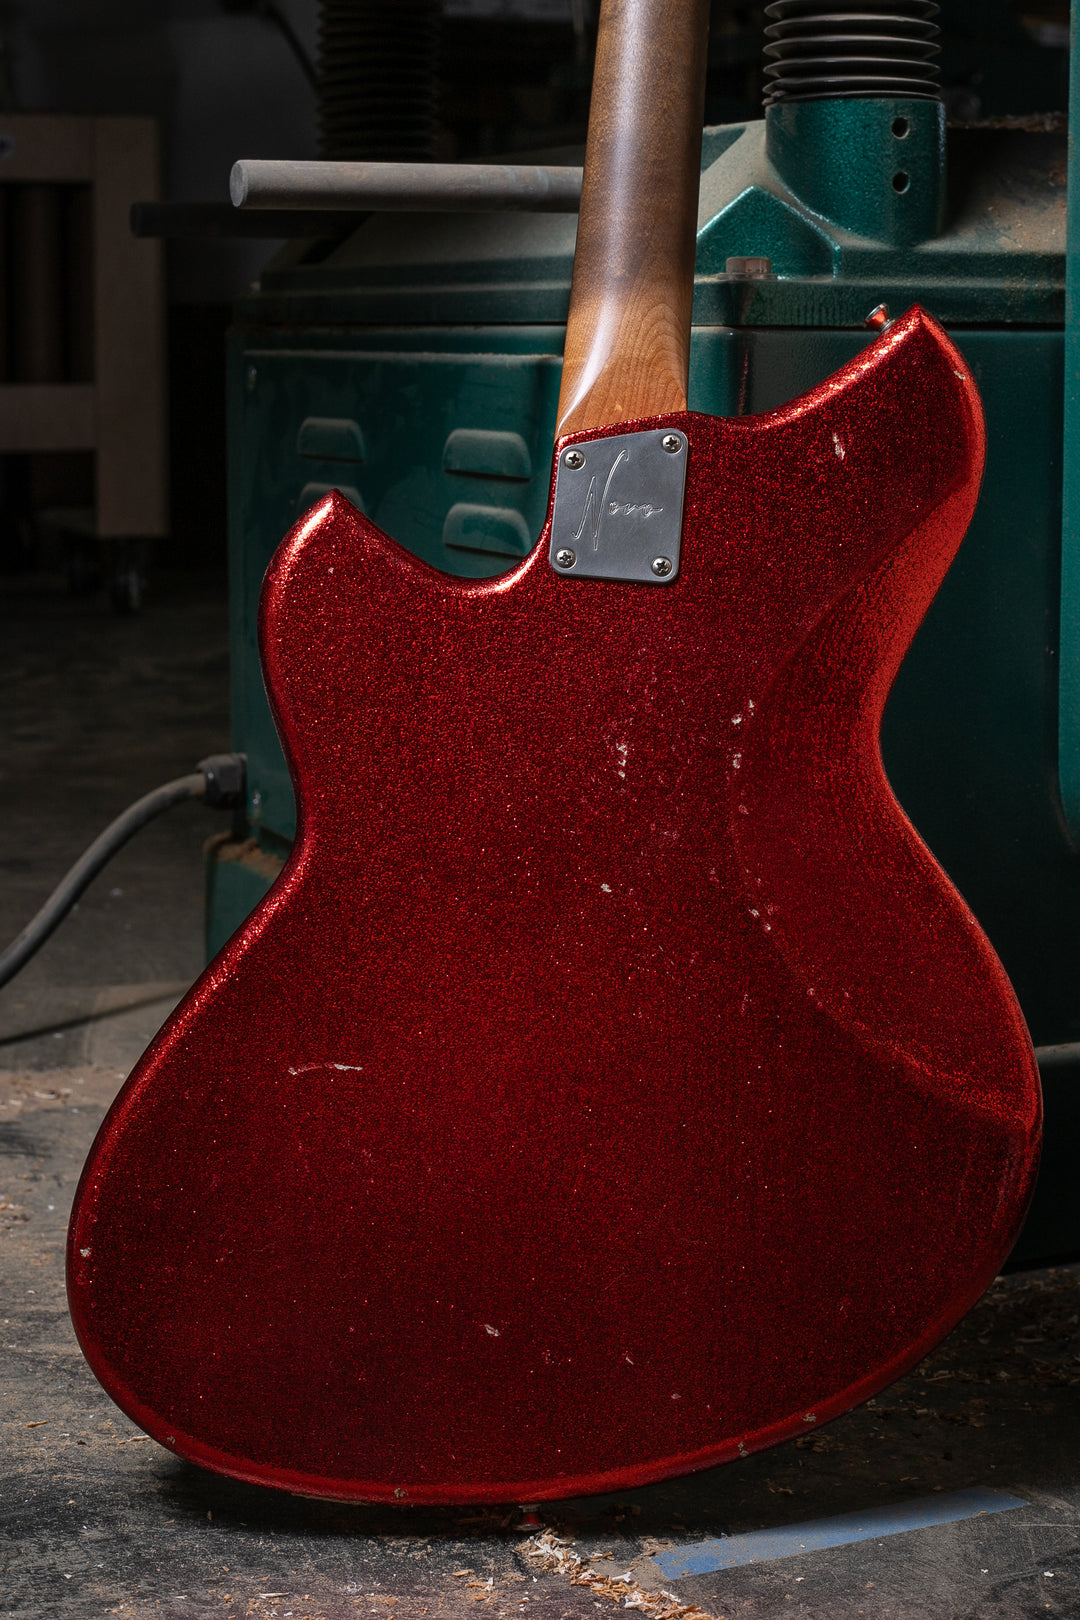 Novo Serus P2 in Candy Apple Red Sparkle